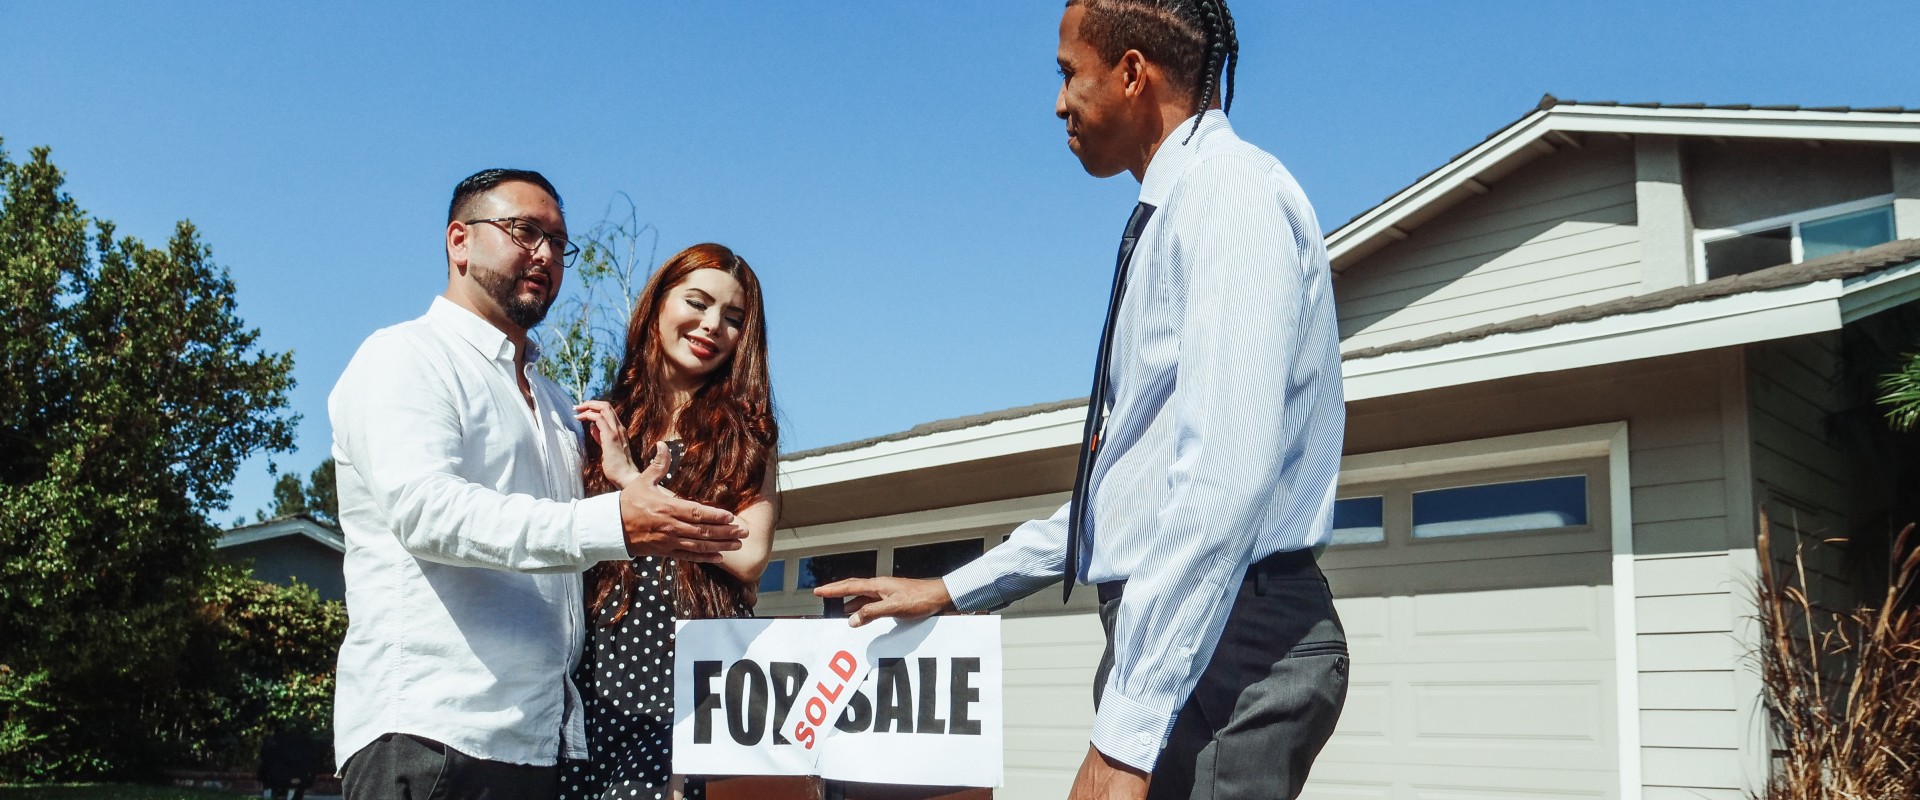 Cash Home Buyers In Las Vegas: The Fastest And Easiest Way To Sell Your Home